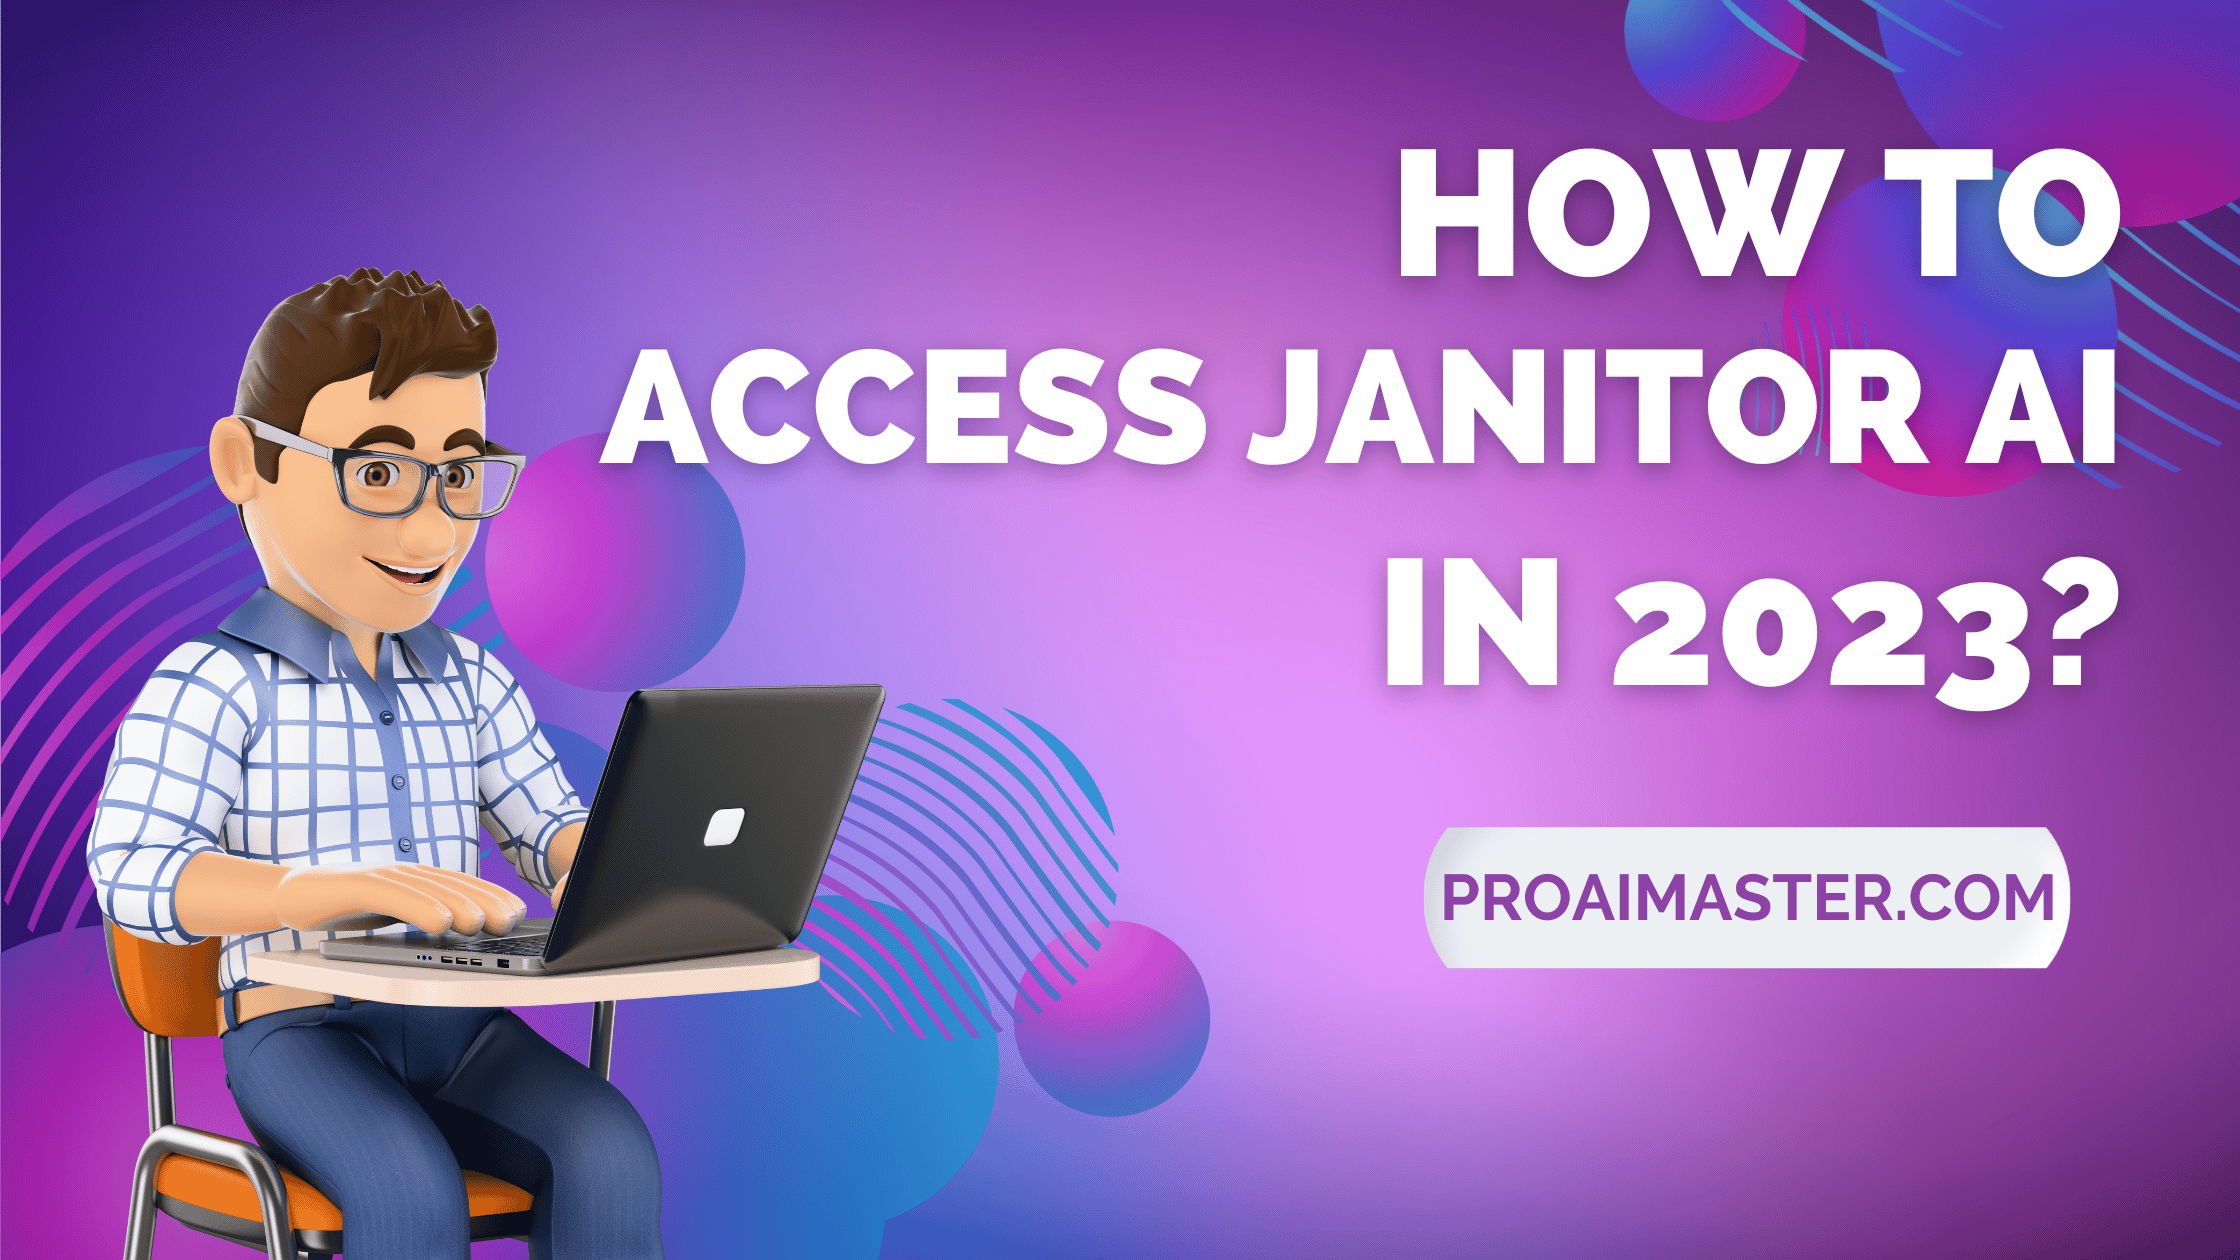 Janitor AI Login: How to Access Your Account in 2023?